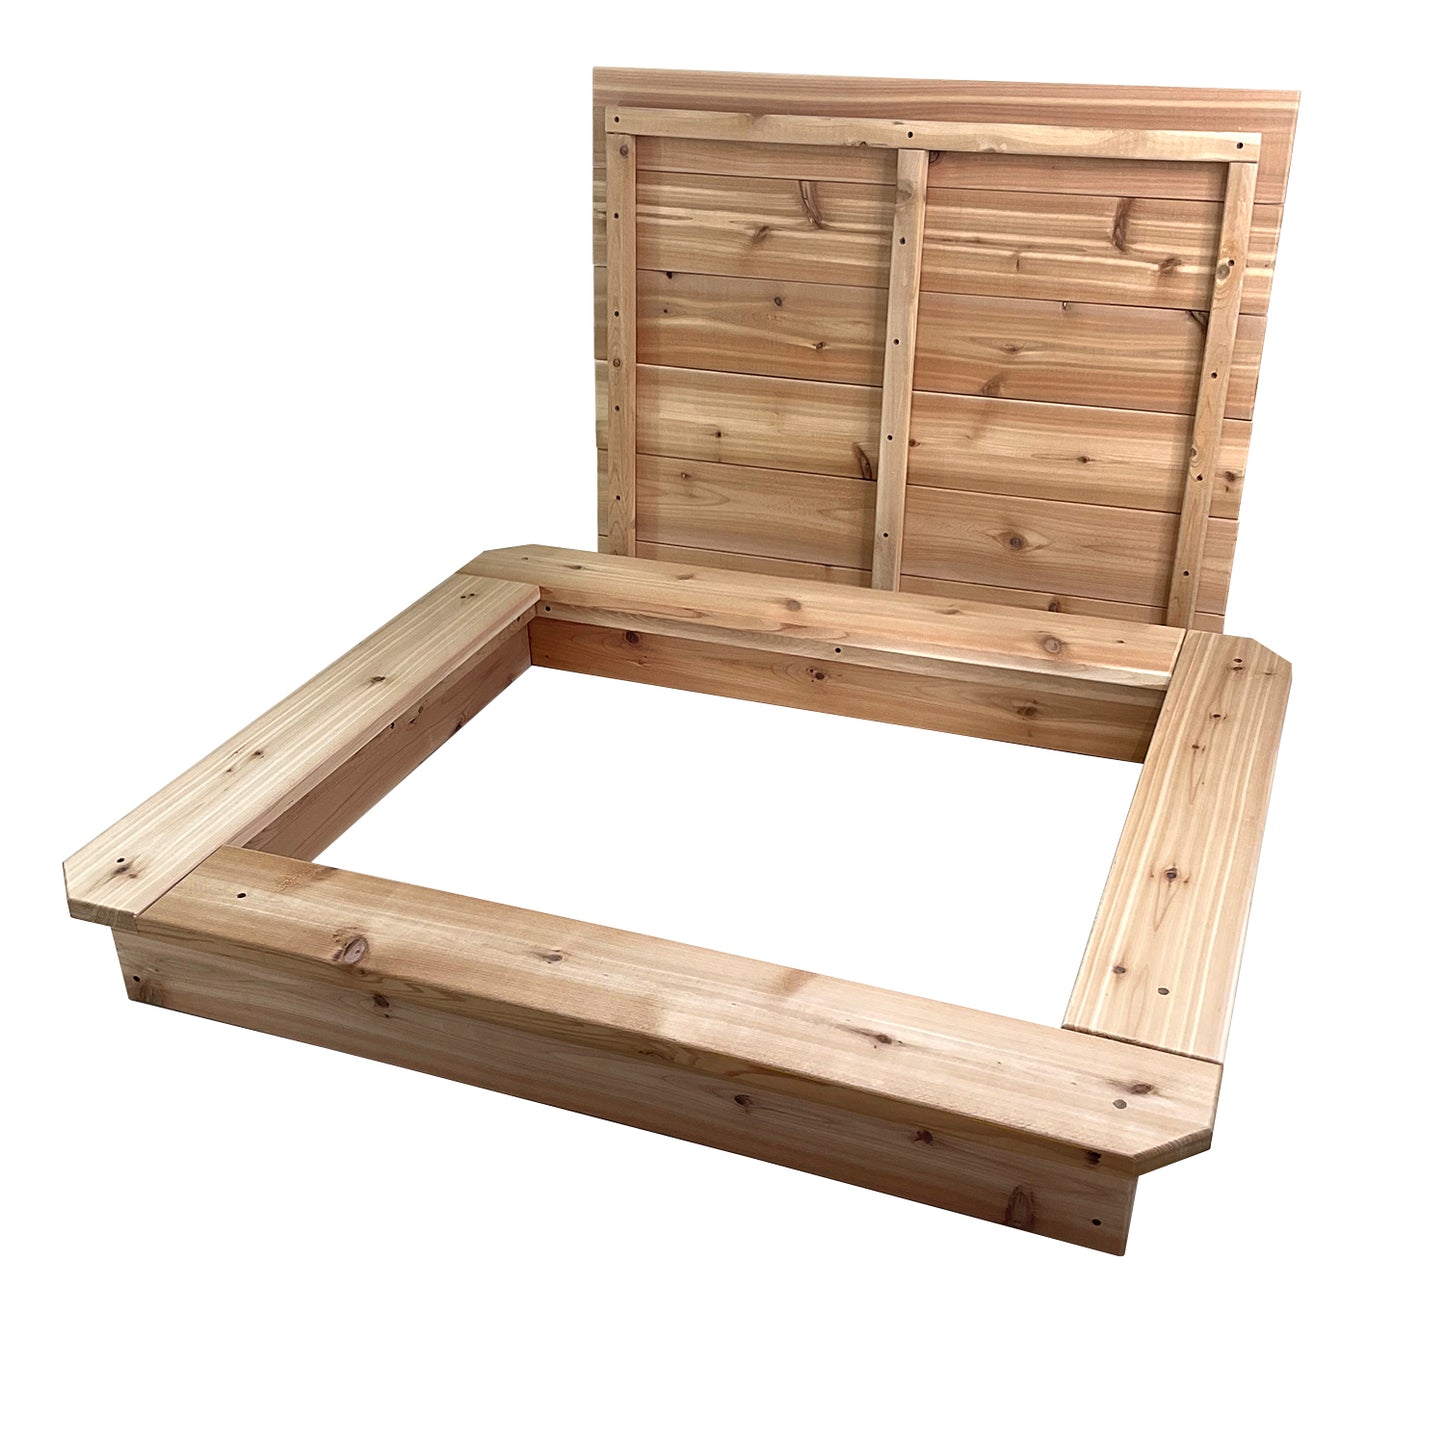 Cedar Sandbox with Lid - Just Playing (Made in Canada)